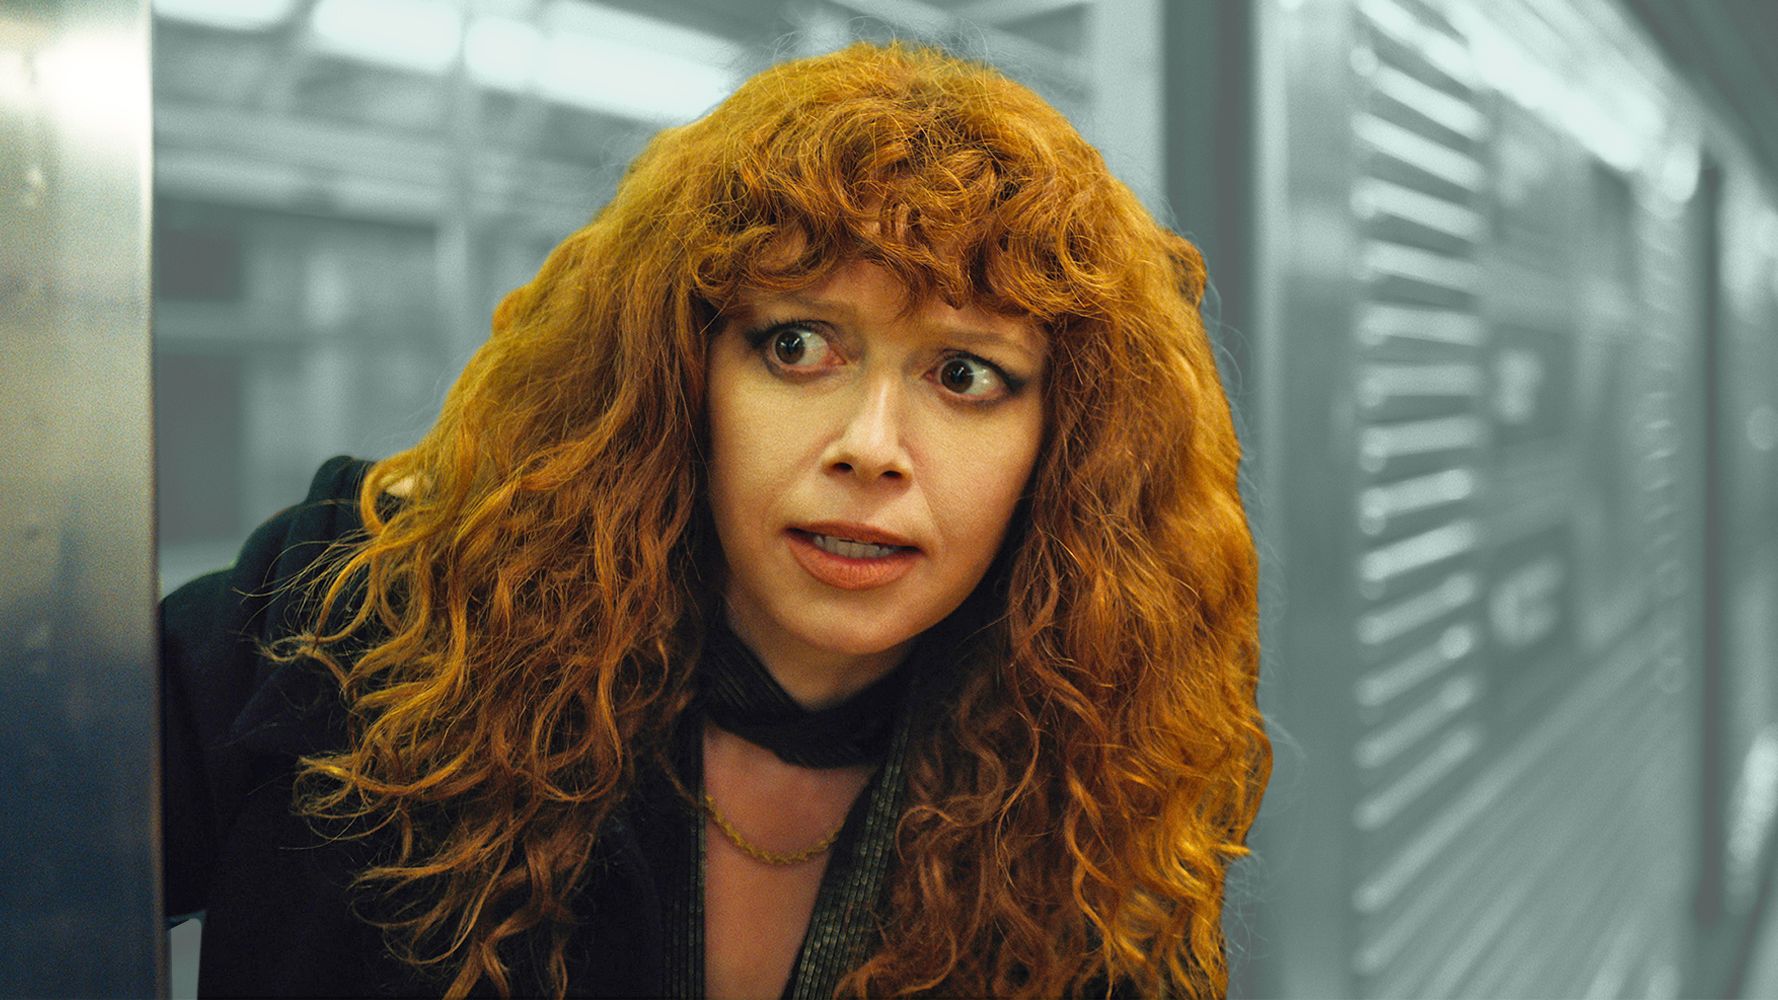 Russian Doll Season 2 Review: New Episodes Lose The Plot